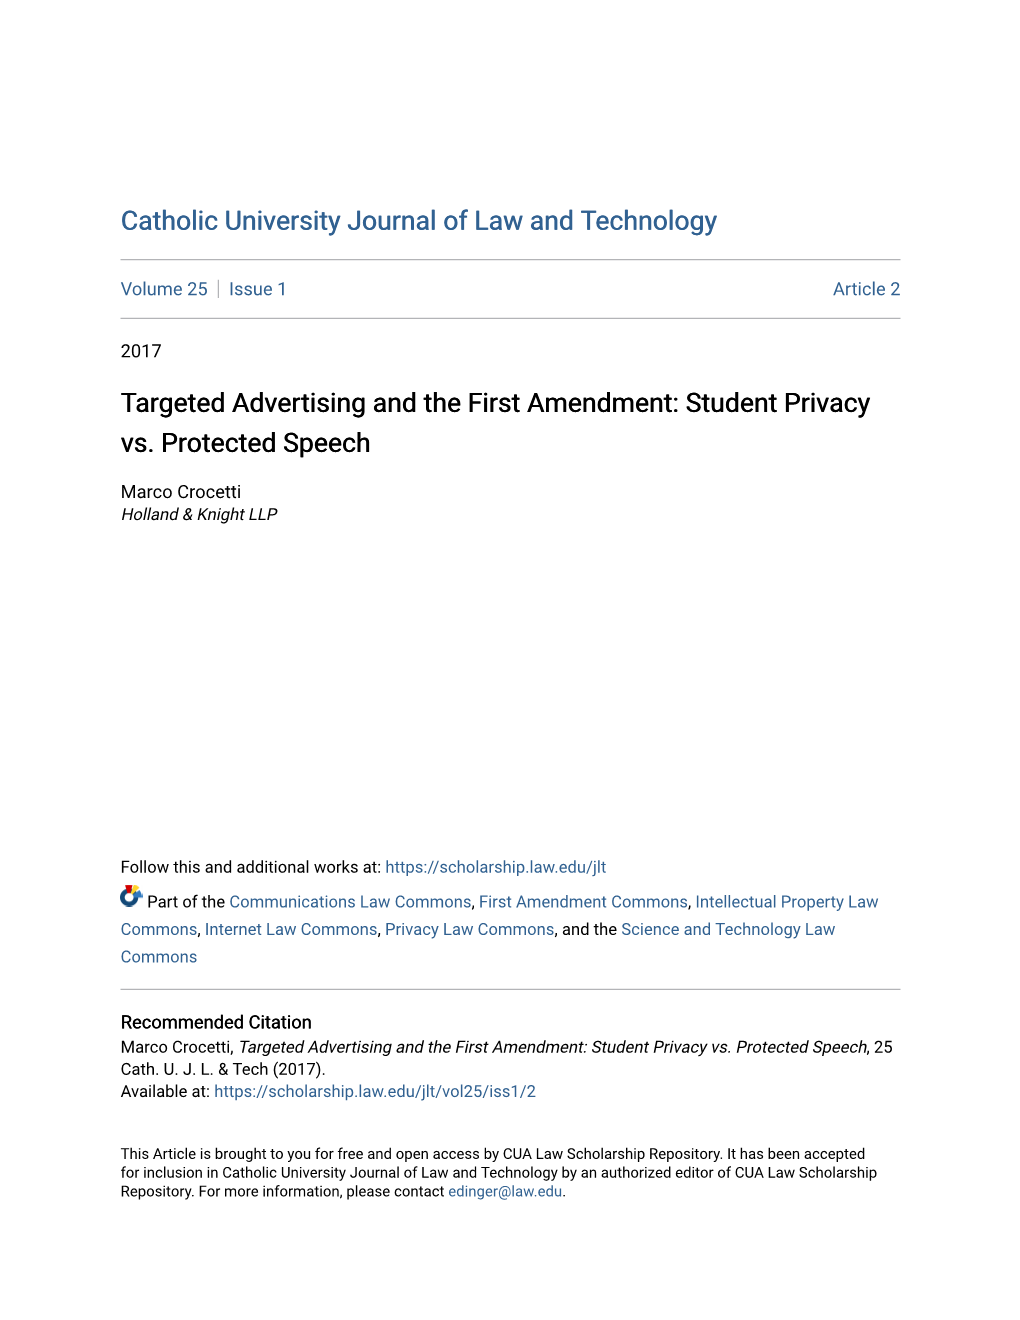 Targeted Advertising and the First Amendment: Student Privacy Vs